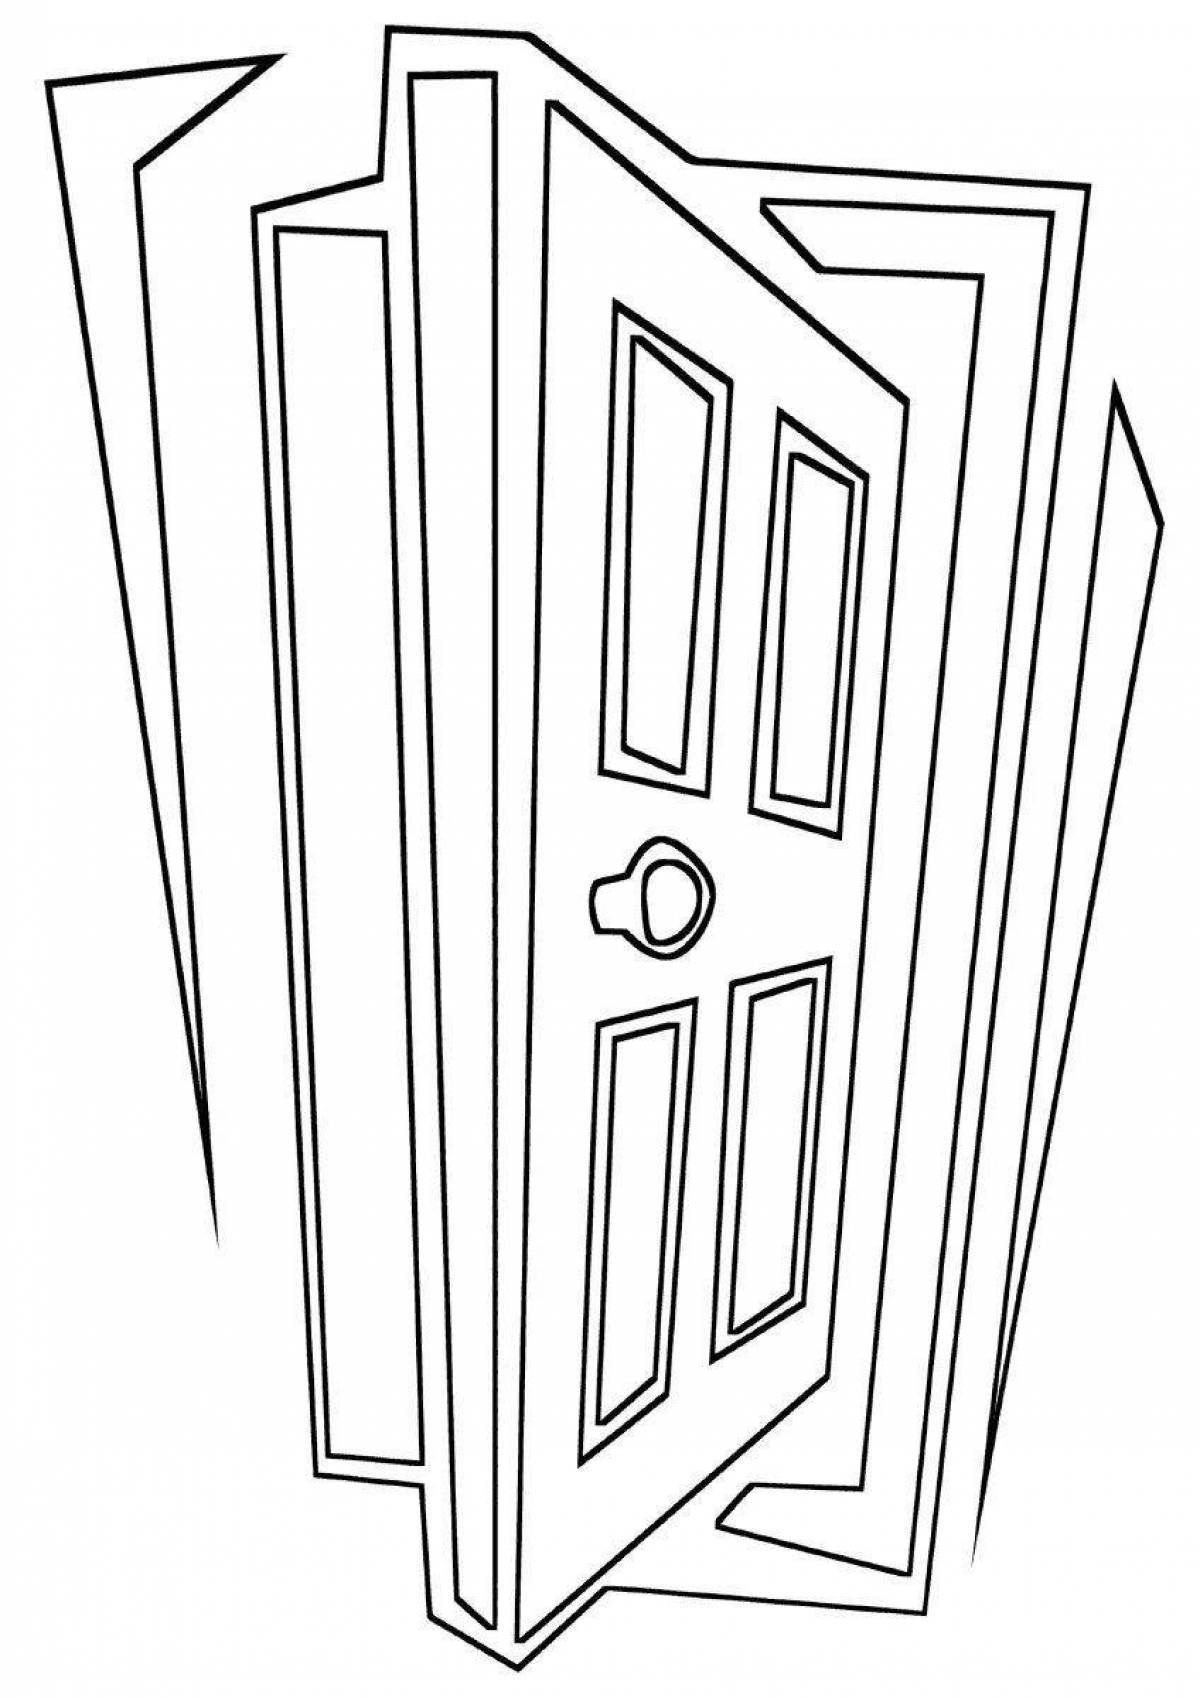 Bright figurine from doors coloring page